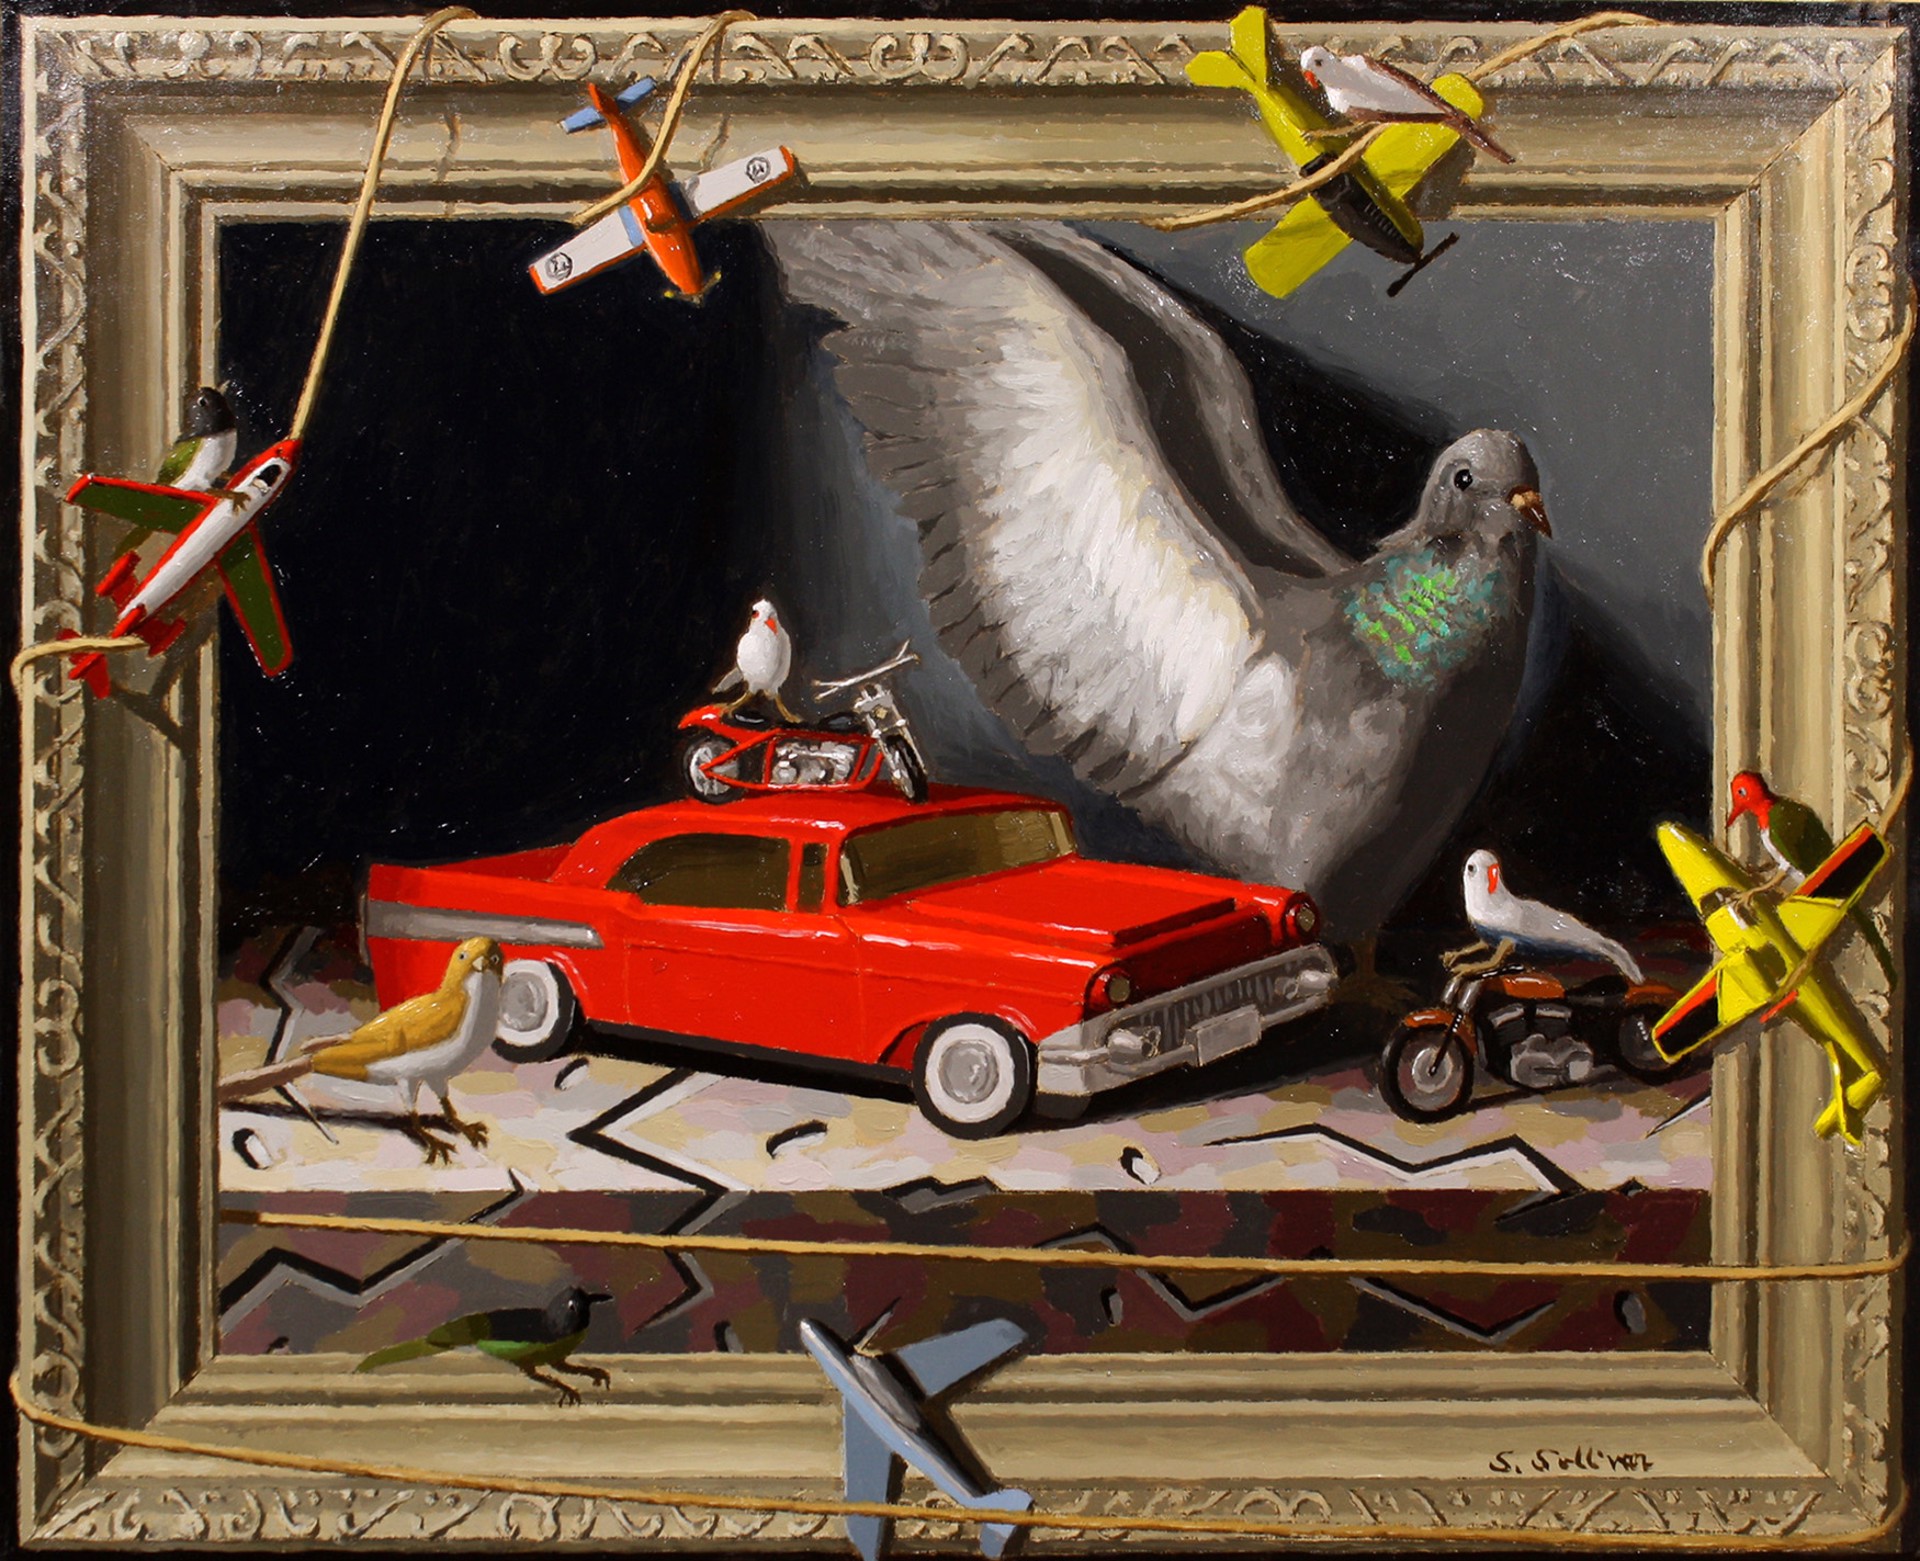 Shawn Sullivan "Flew the Coupe" by Oil Painters of America